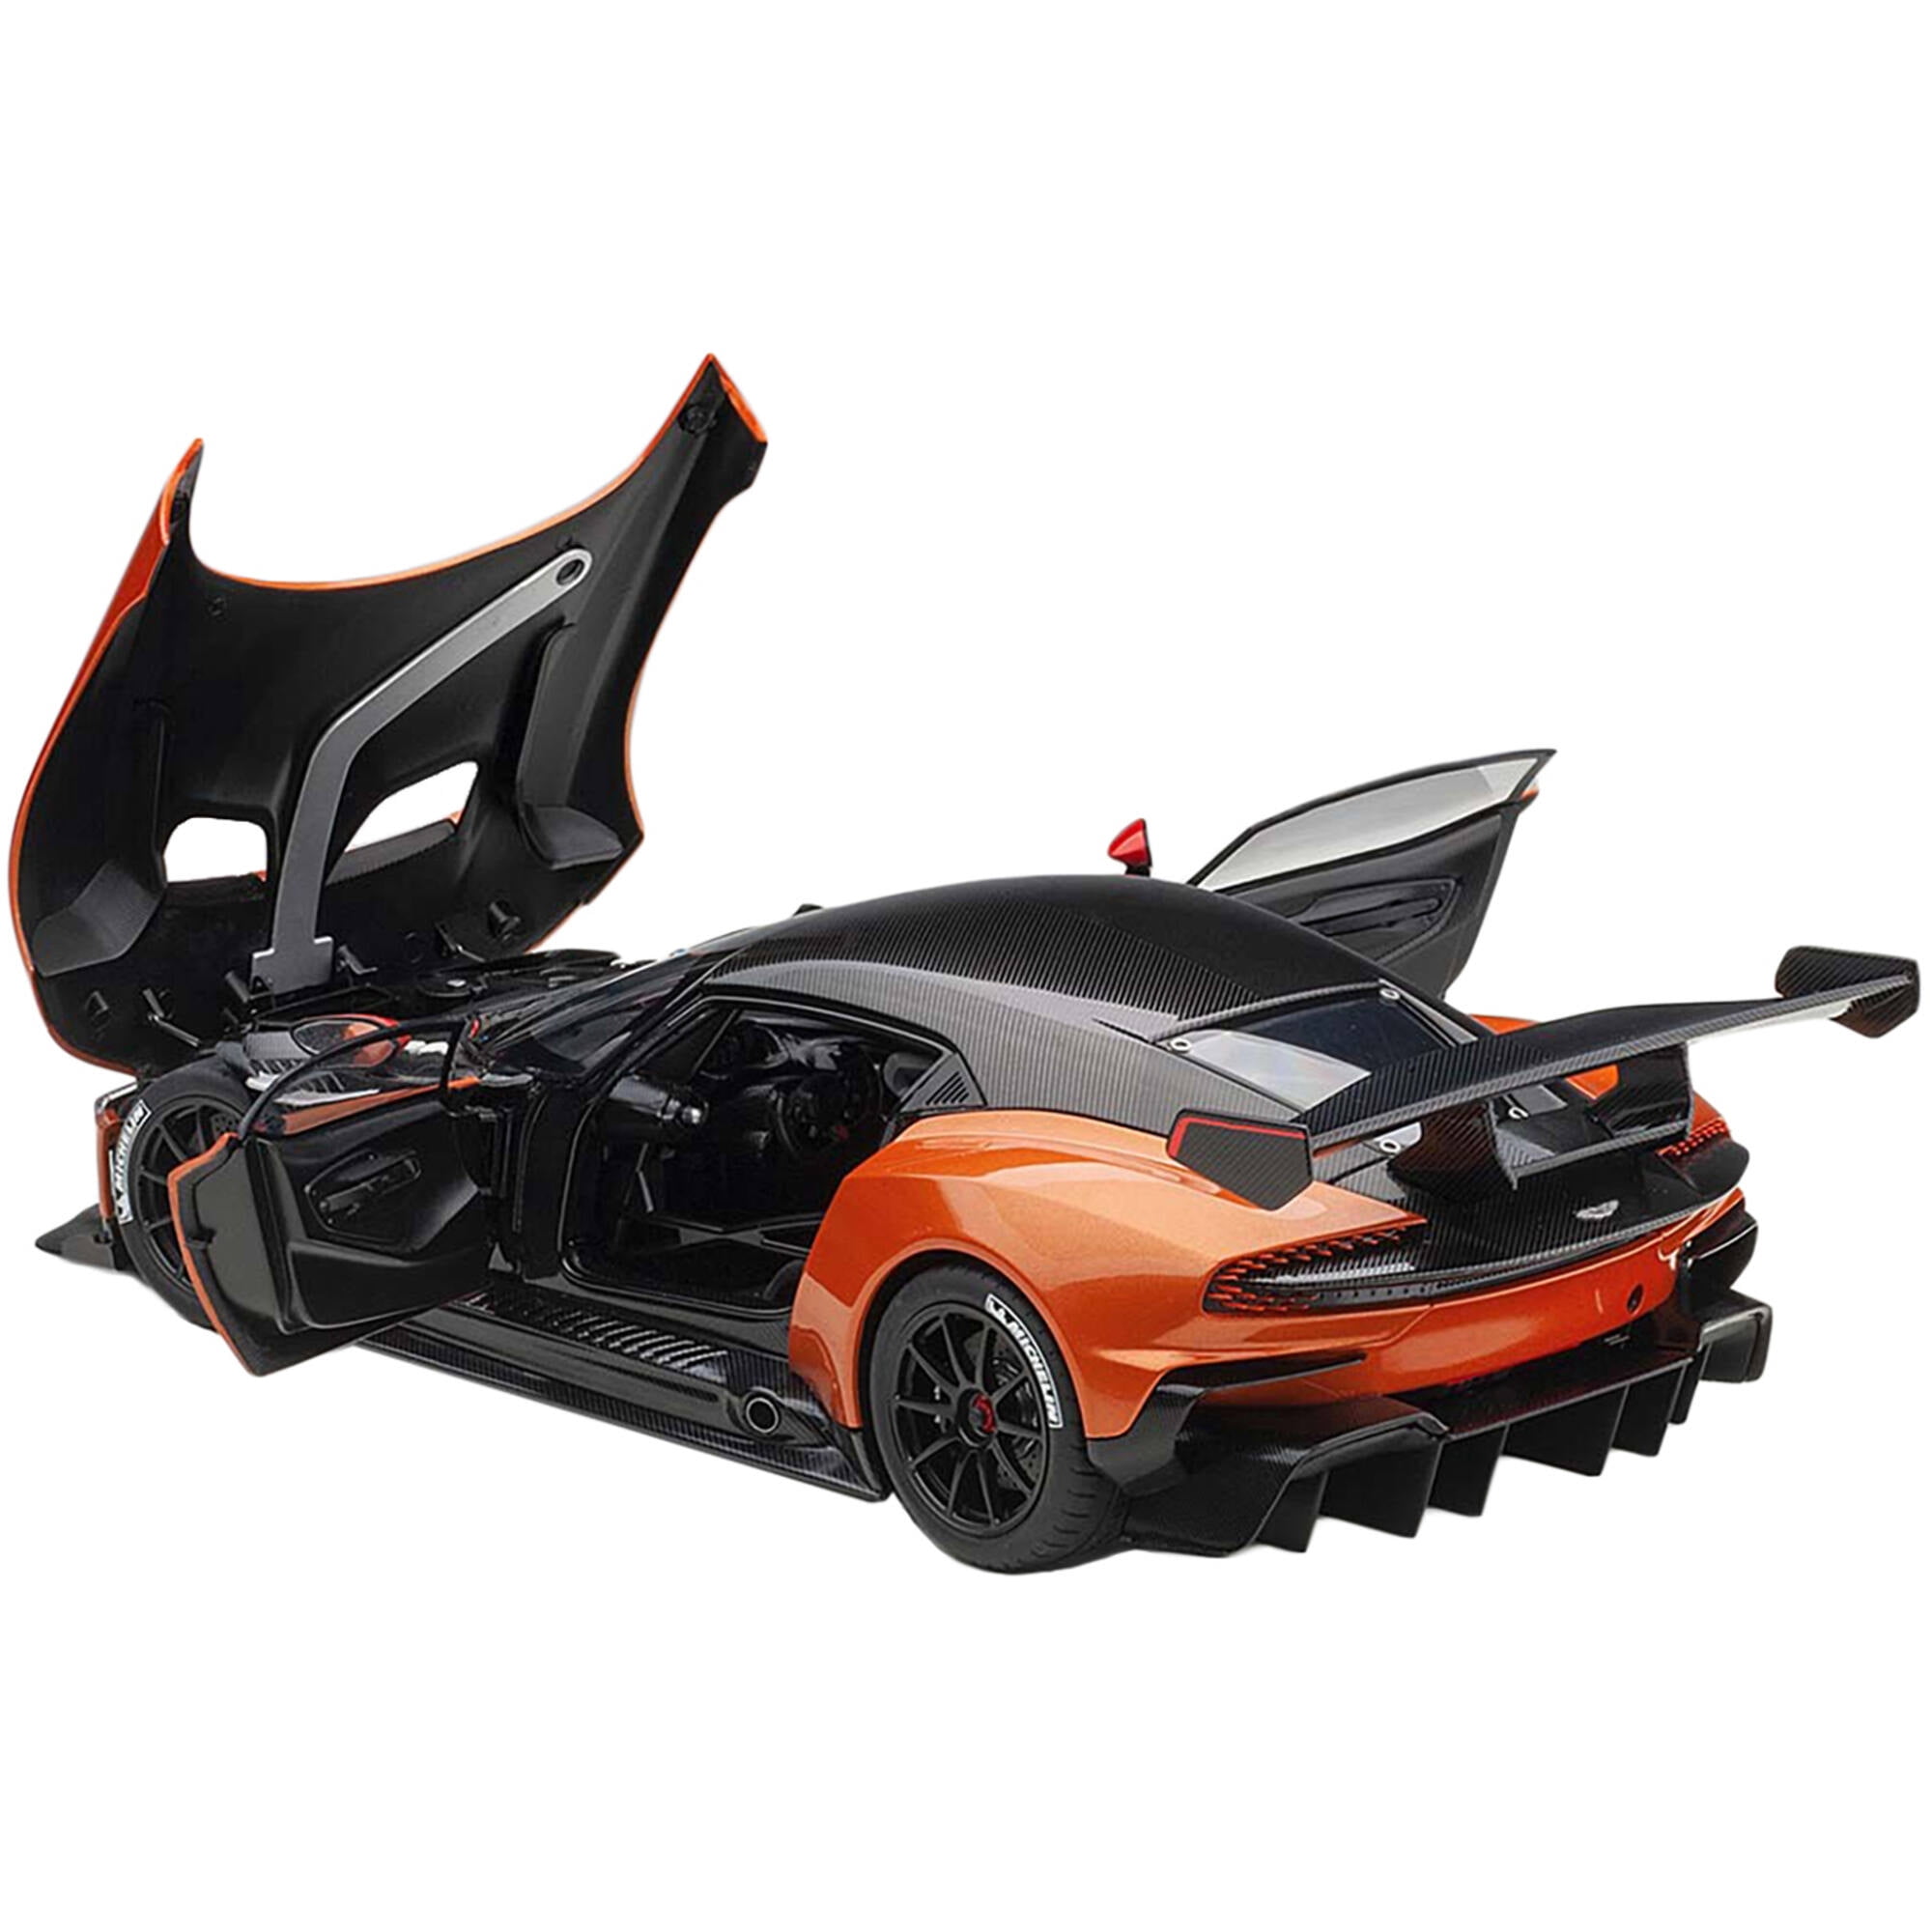 Picture of Autoart 70264 Aston Martin Vulcan Madagascar Orange with Carbon Top 1 by 18 Scale Model Car